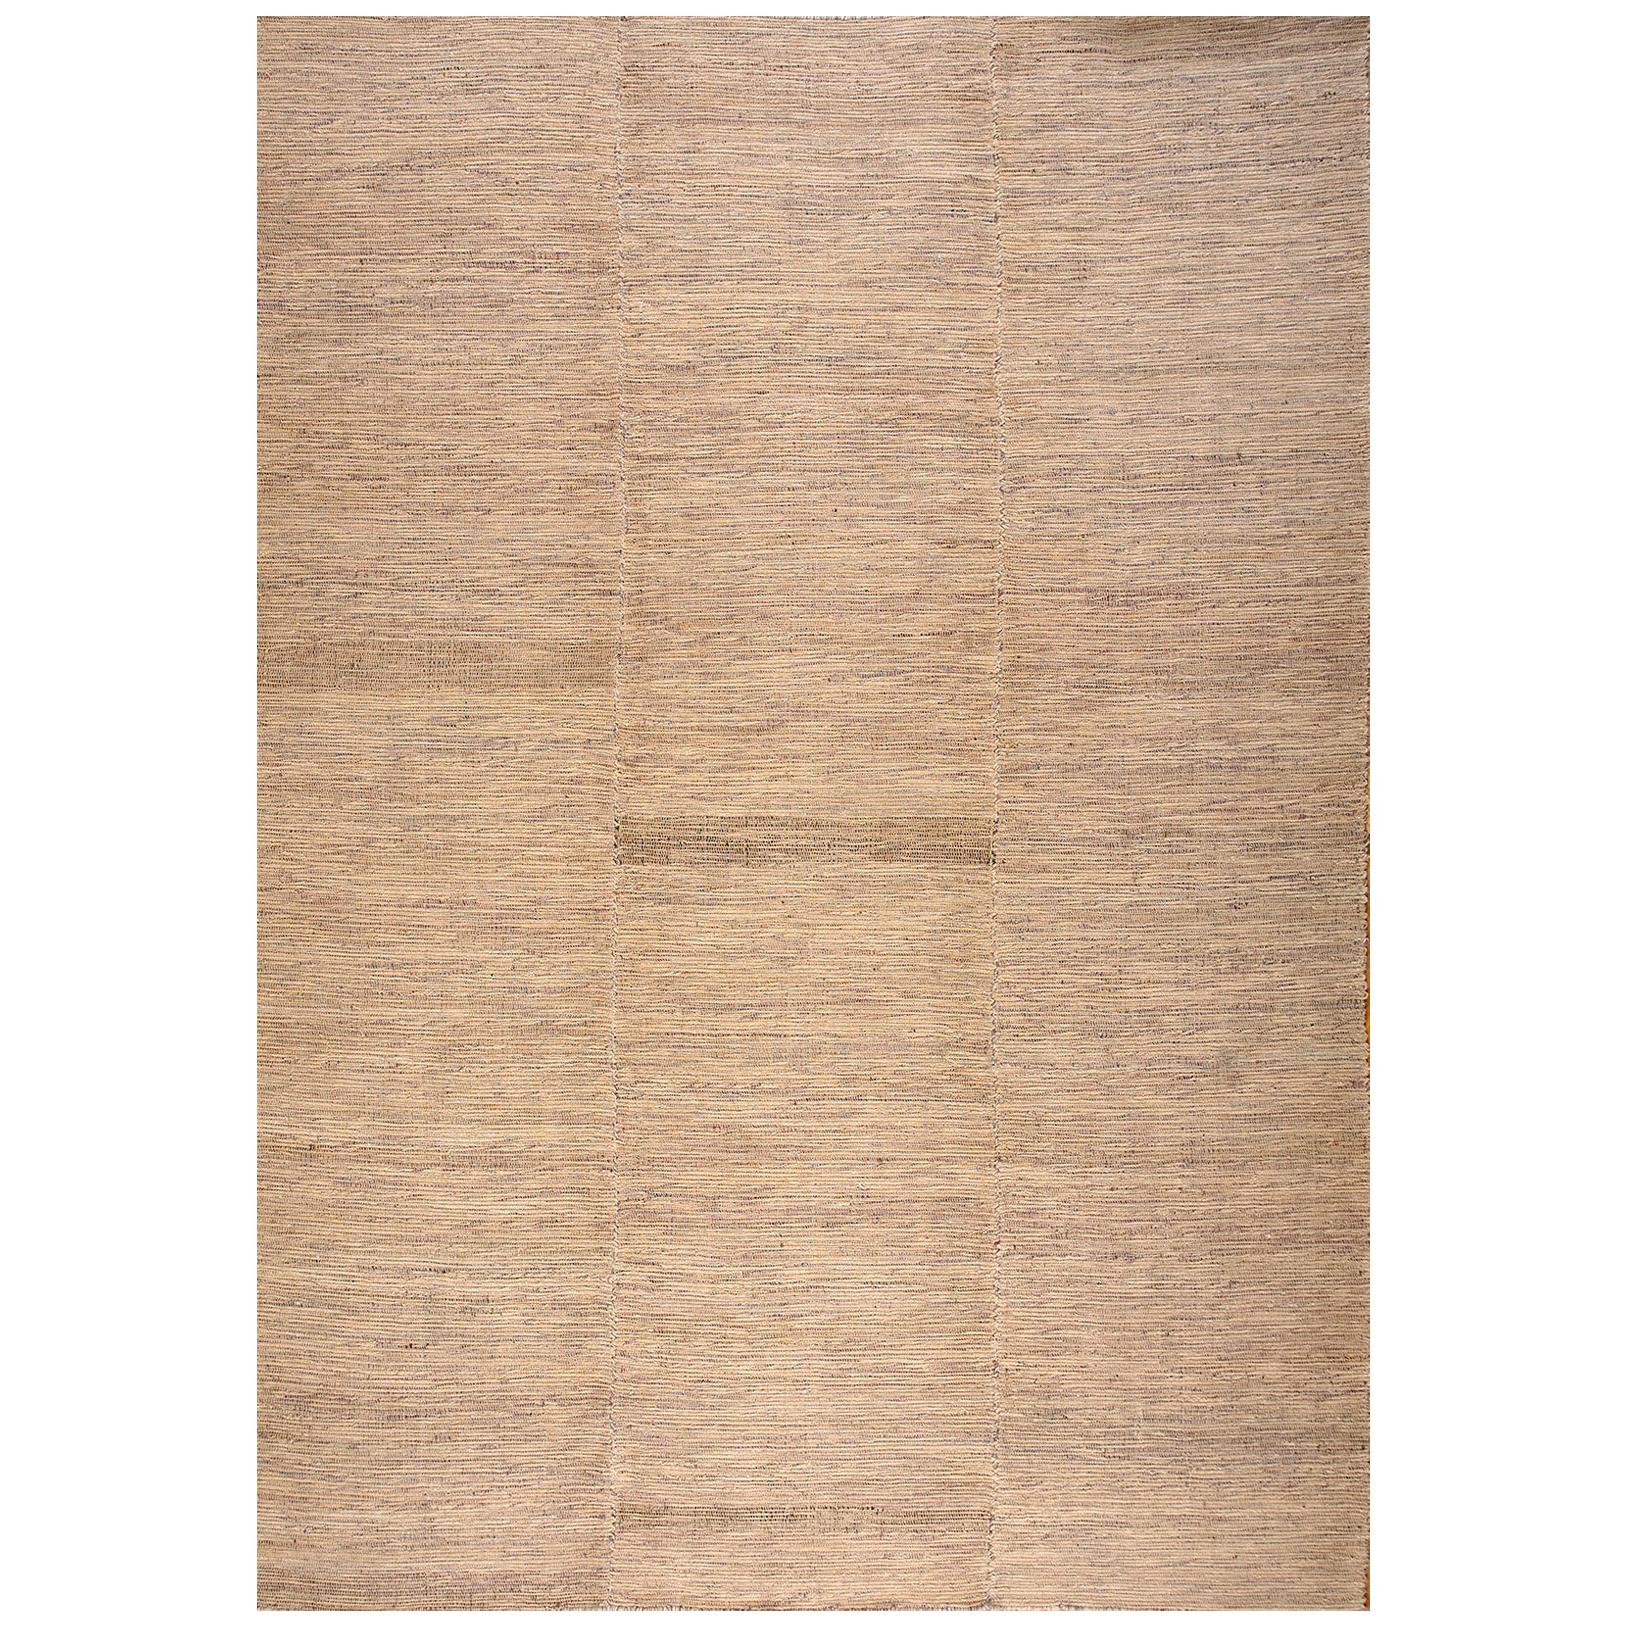 Contemporary Handwoven Wool Shaker Style Flat Weave Carpet 9' 2" x 12' 6" For Sale